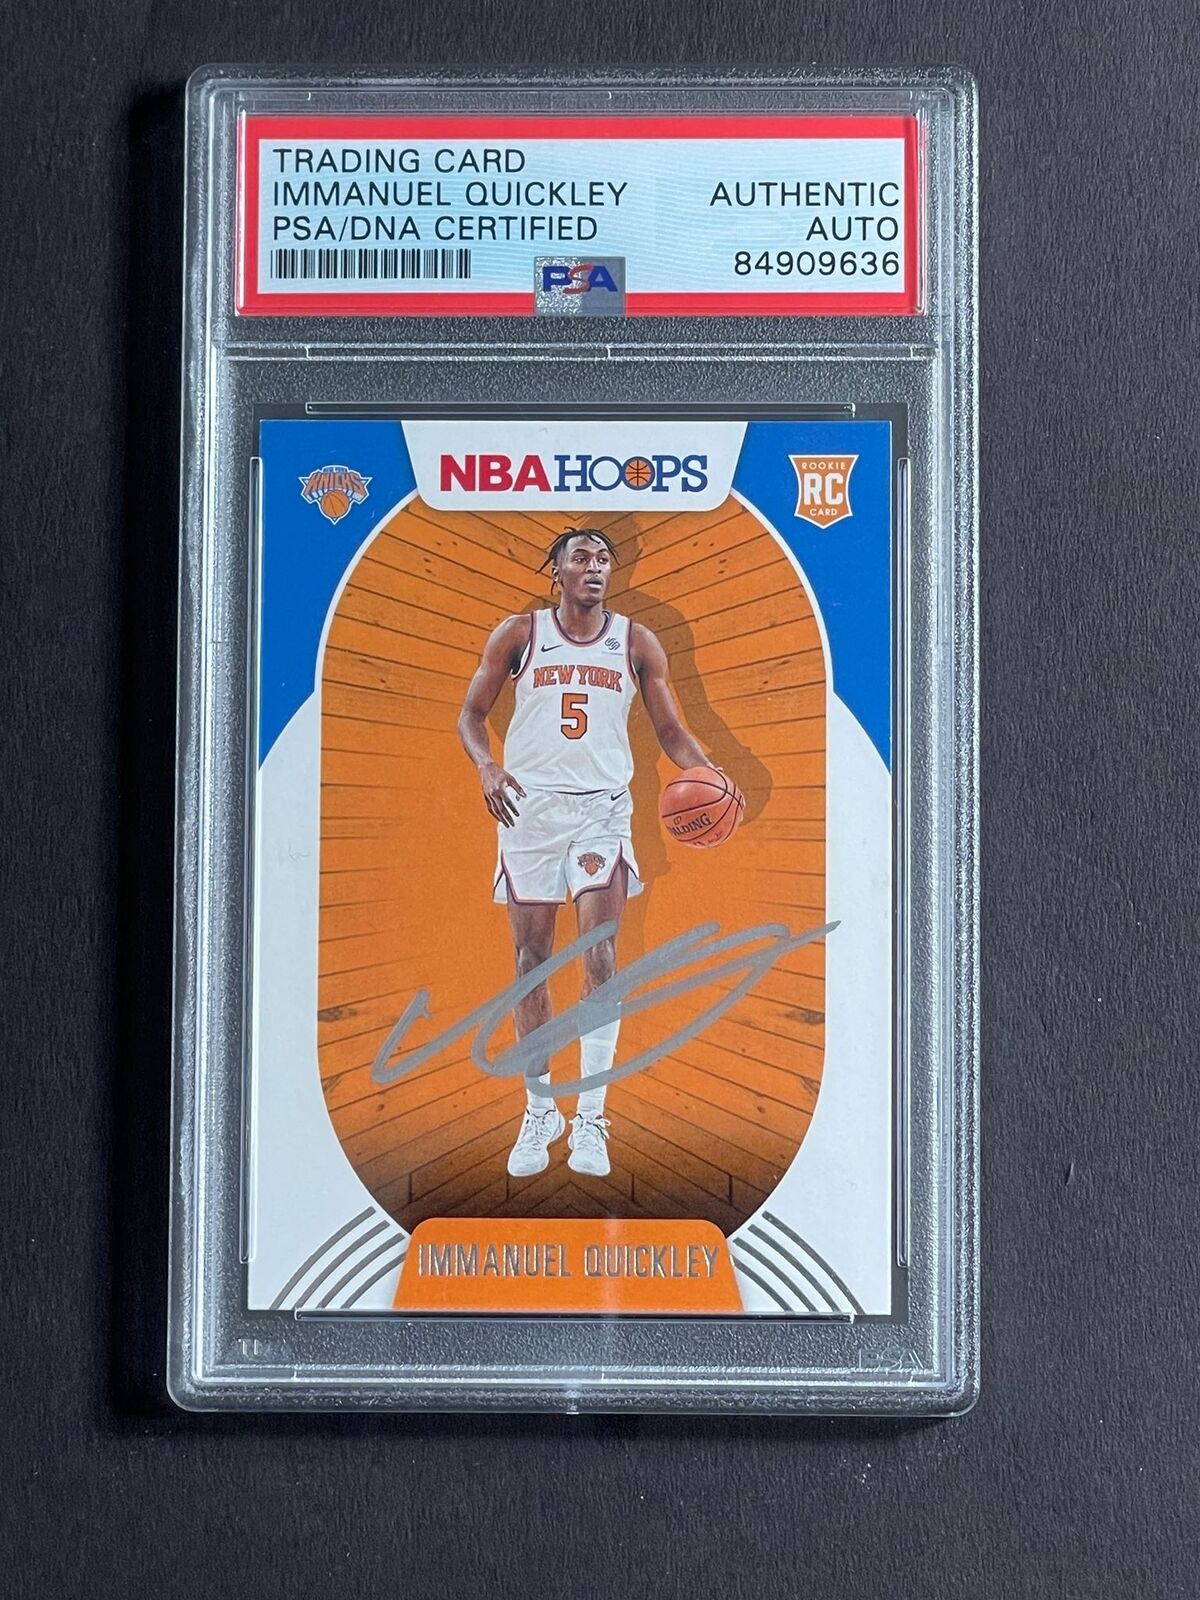 2020-21 NBA Hoops #249 IMMANUEL QUICKLEY Signed Card AUTO PSA Slabbed RC  Knicks